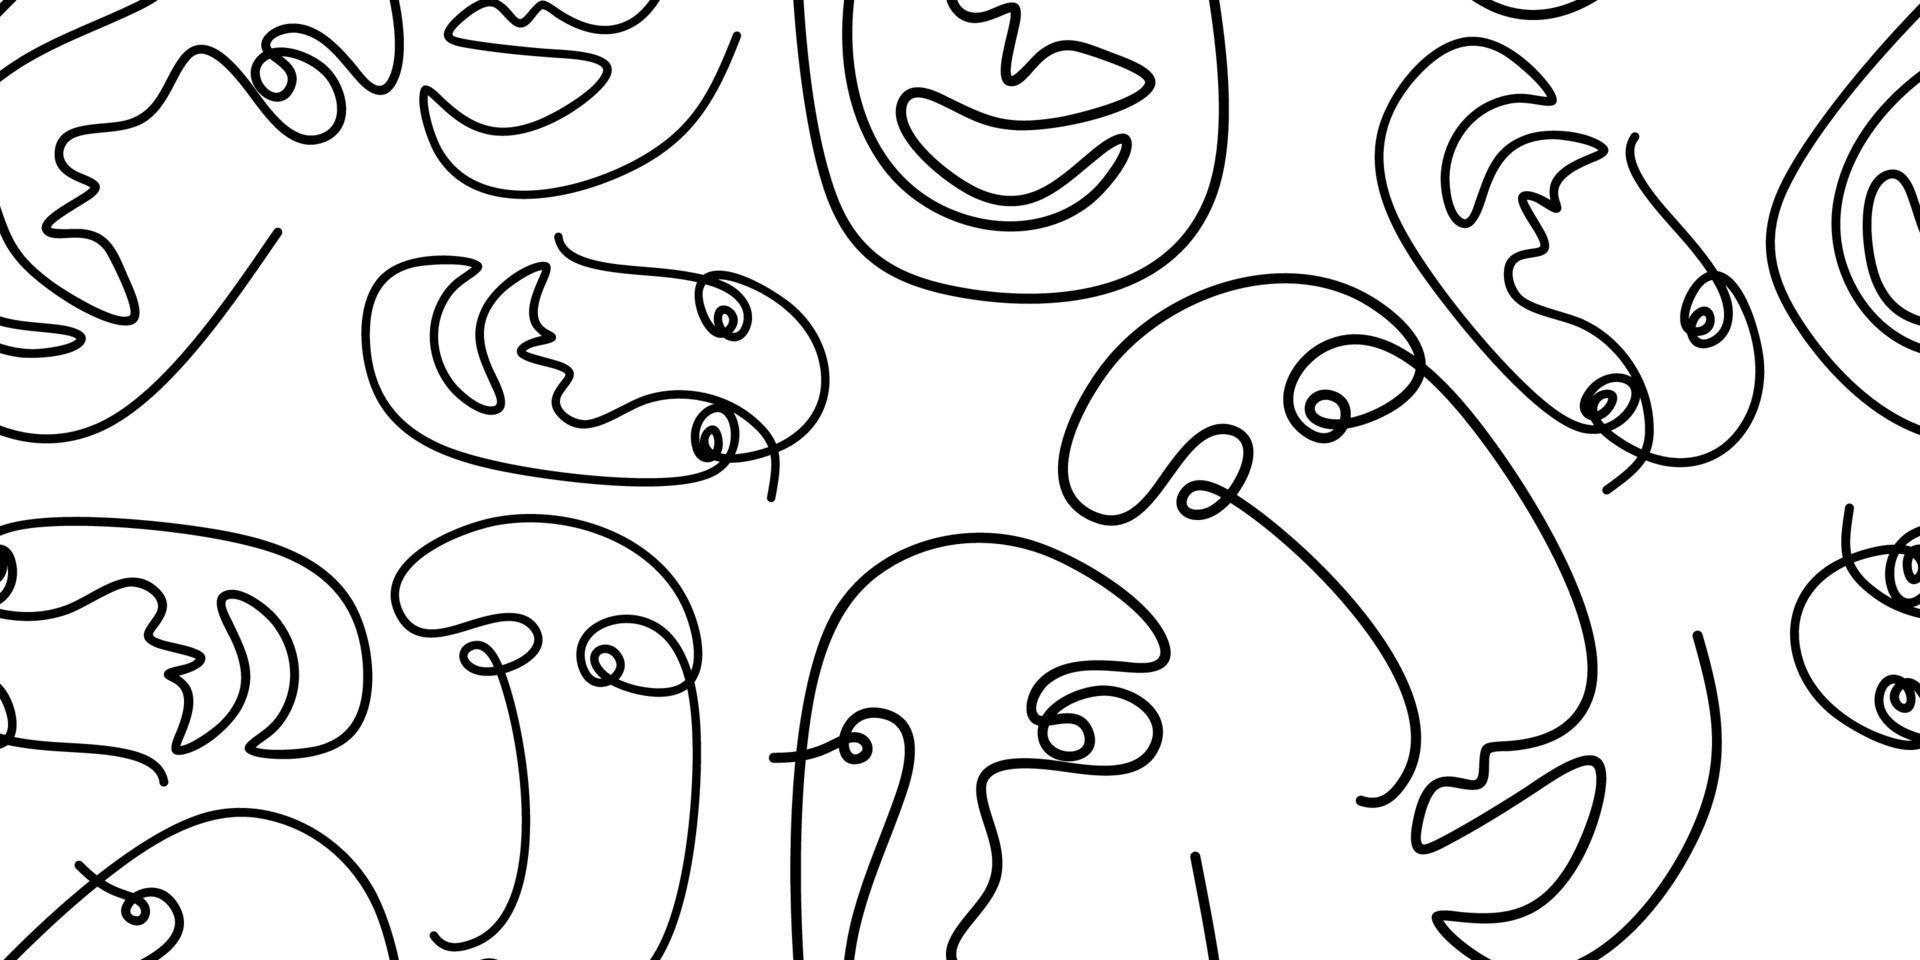 Abstract one line drawing masks and faces design isolated background. vector